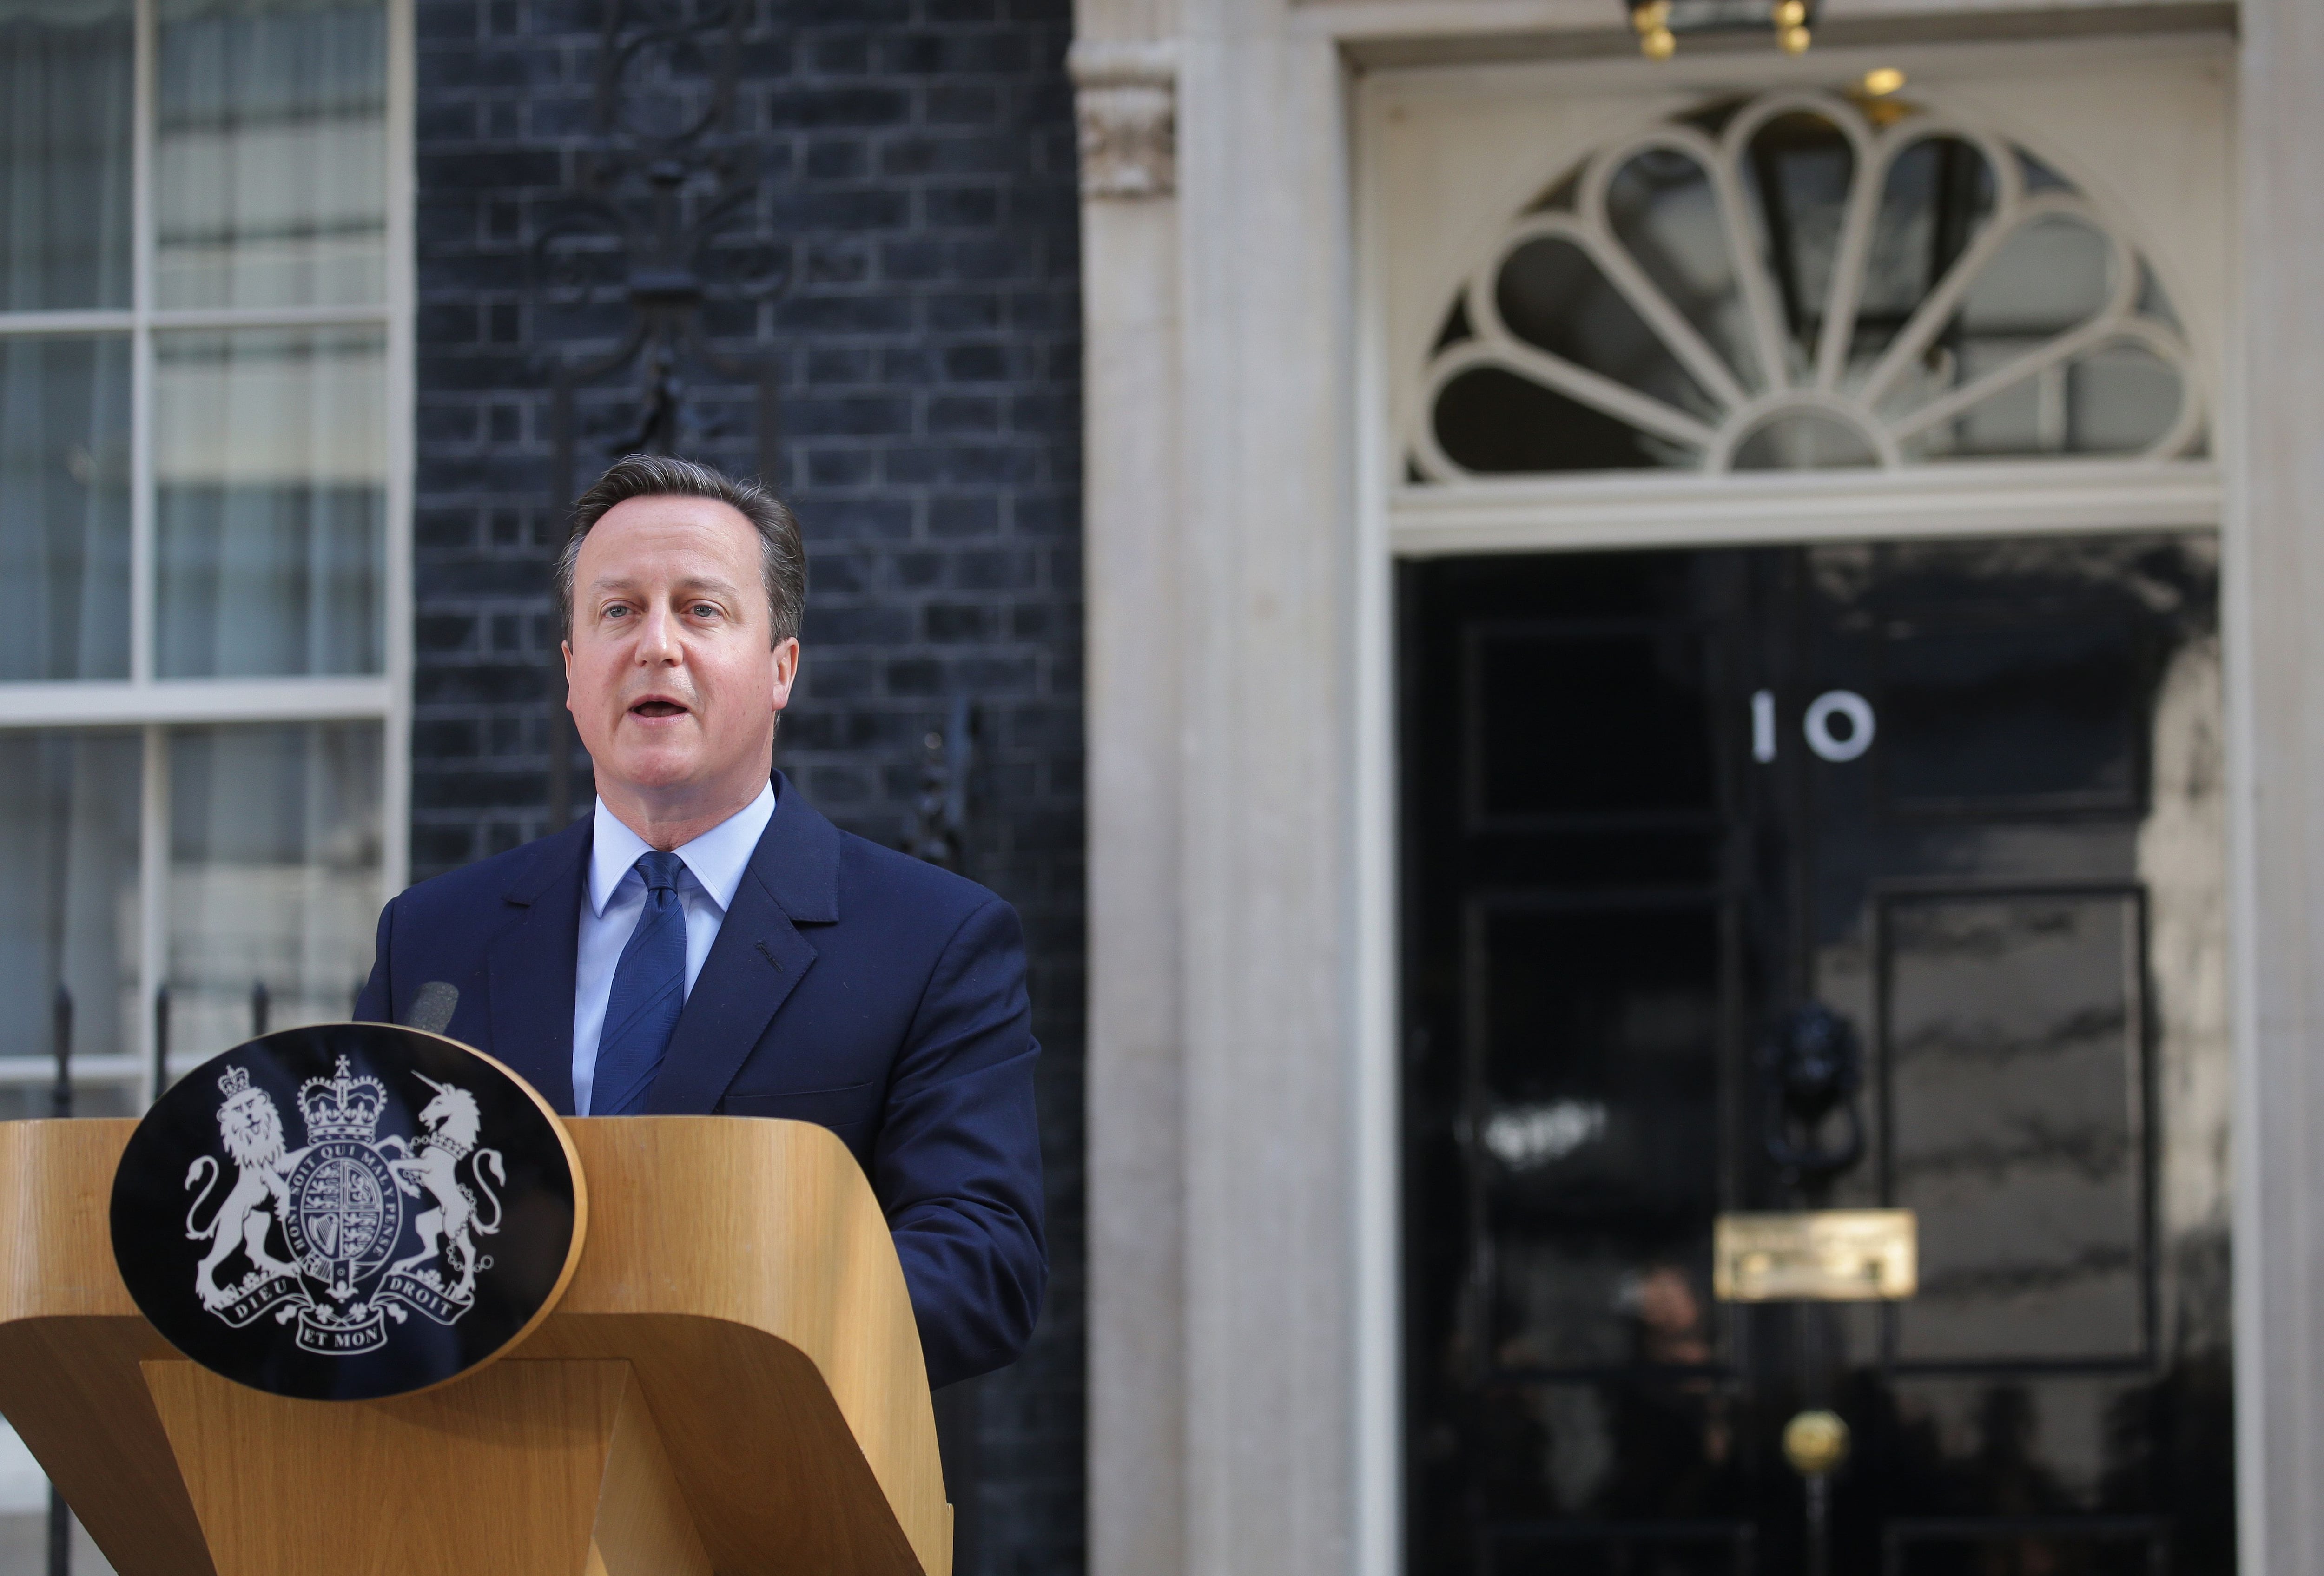 British Prime Minister David Cameron delivers a statement in front of Number 10 Downing Street in London, Britain, 24 June 2016. In a referendum on 23 June, Britons have voted by a narrow margin to leave the European Union (EU). Photo: MICHAEL KAPPELER/dpa | usage worldwide   (Photo by Michael Kappeler/picture alliance via Getty Images)